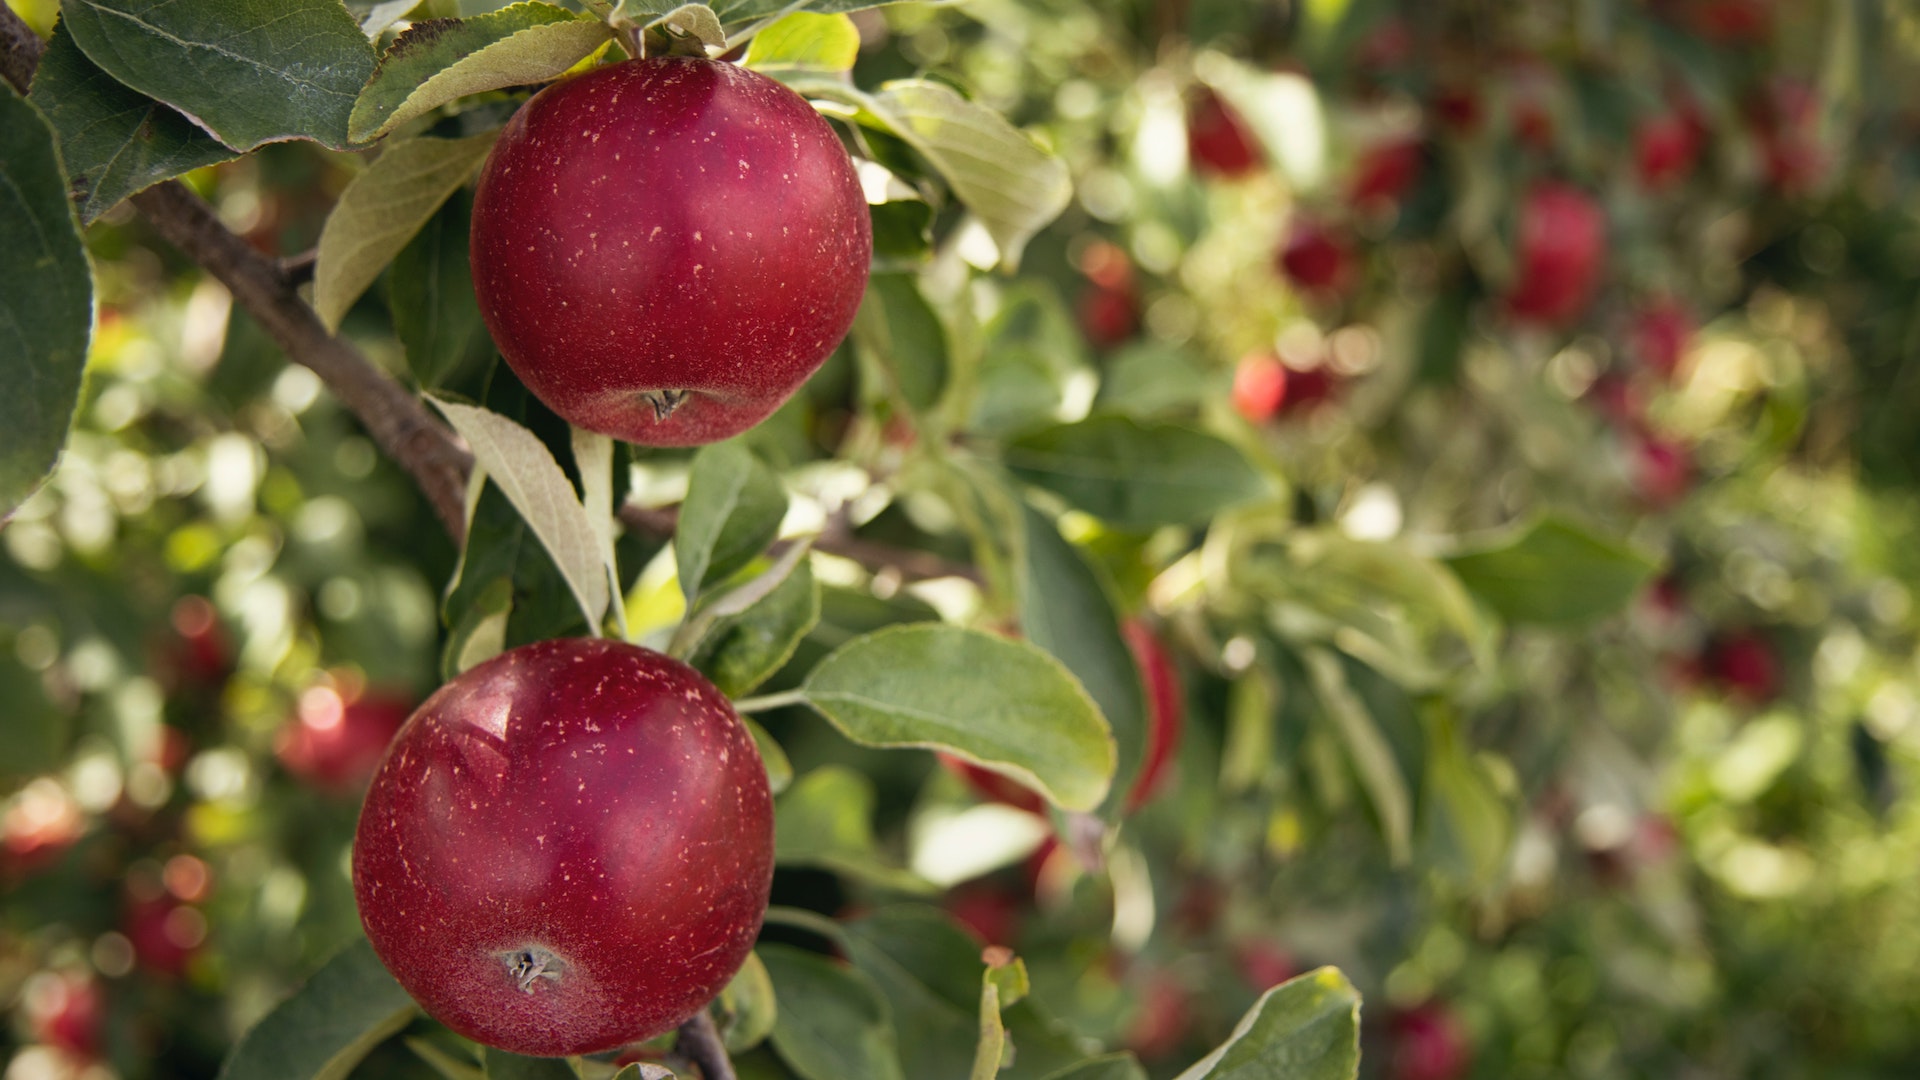 Climate change is driving apple orchards higher up in the